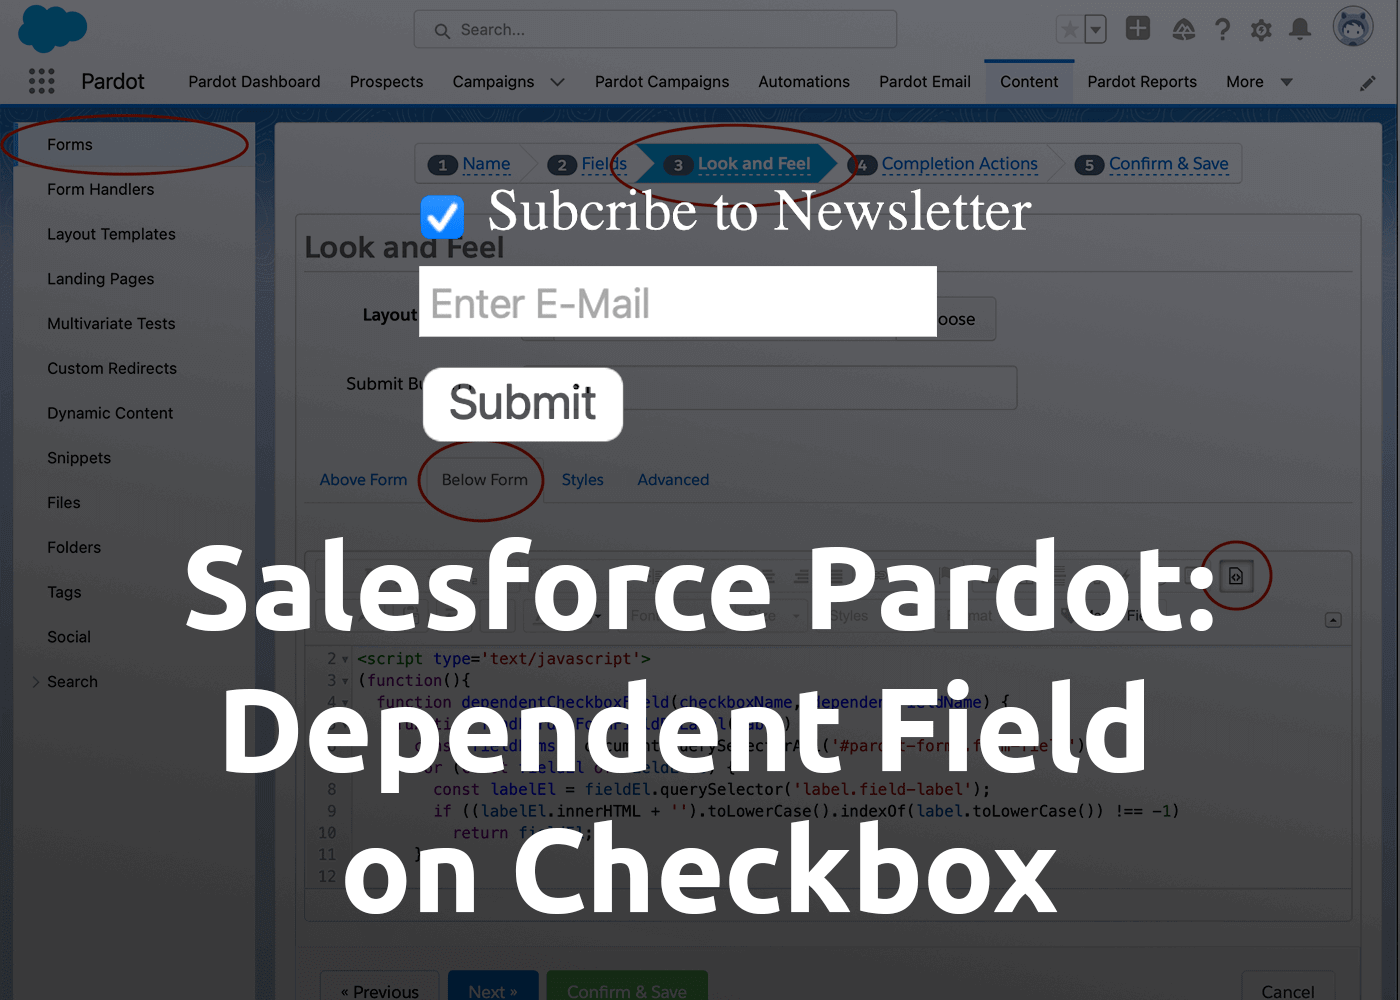 [How-to] Salesforce Pardot Dependent Field on Checkbox